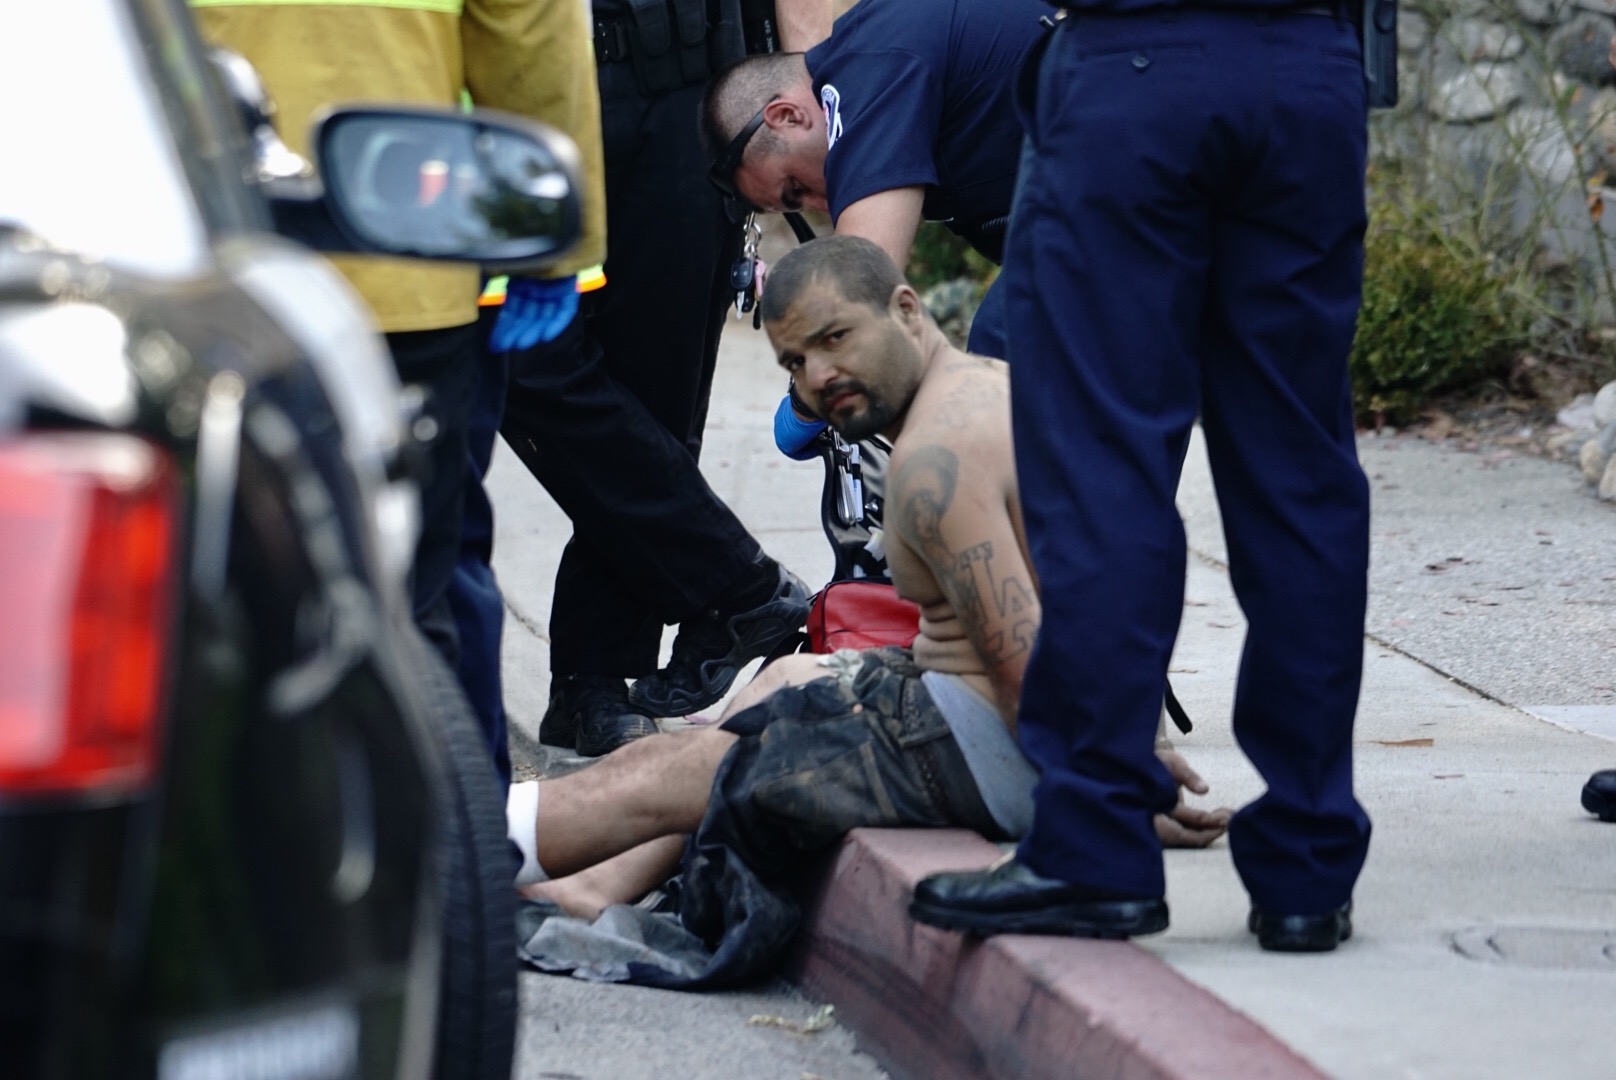 Thumbnail for In a vehicle then on foot, grand theft auto chase ends in South Pasadena